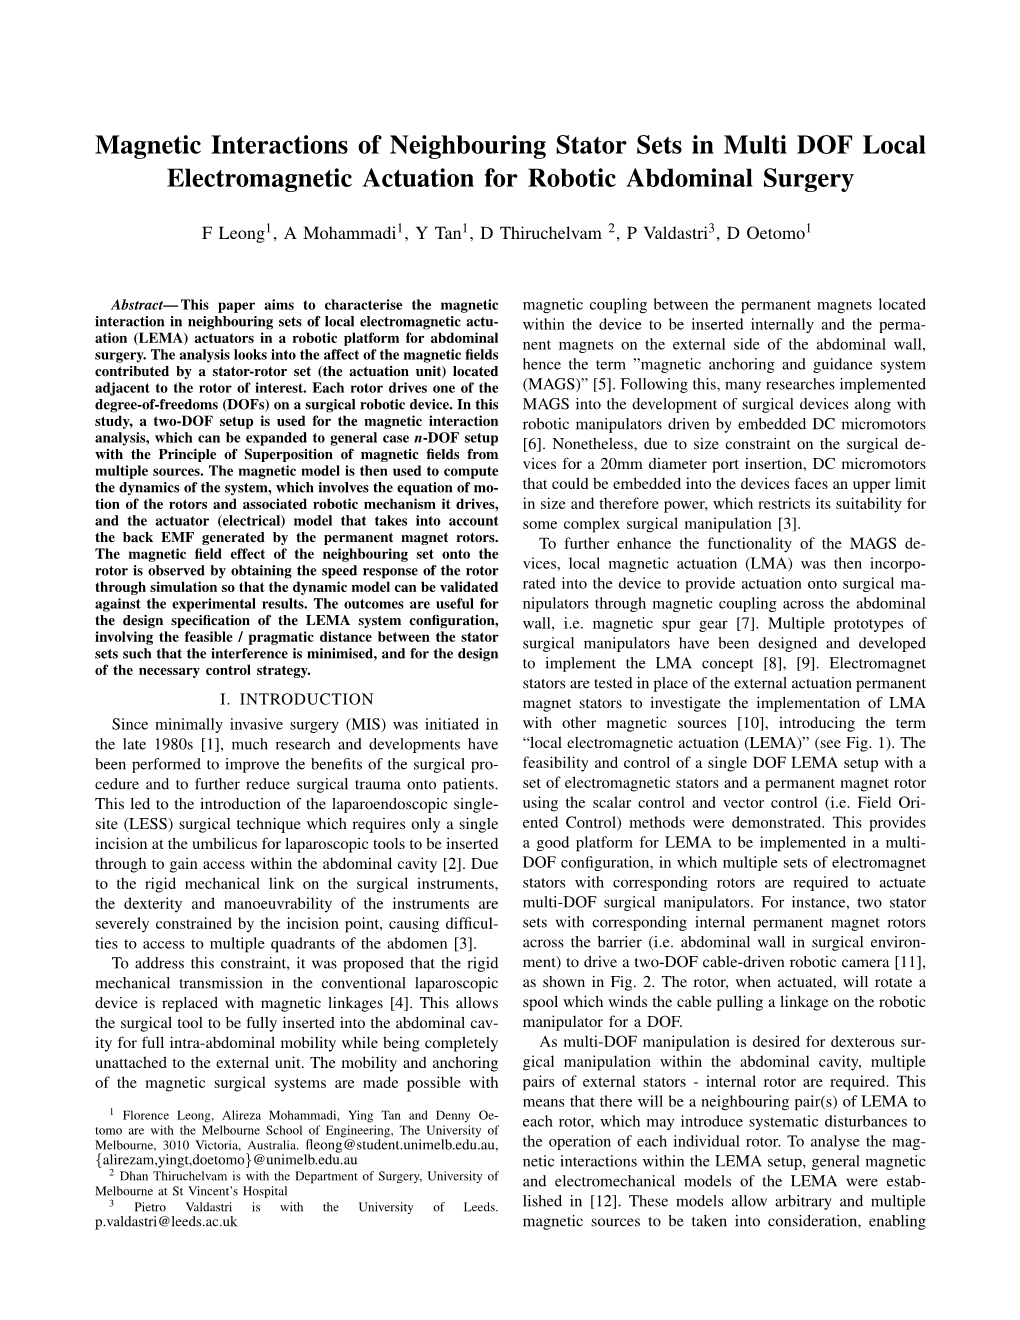 Magnetic Interactions of Neighbouring Stator Sets in Multi DOF Local Electromagnetic Actuation for Robotic Abdominal Surgery